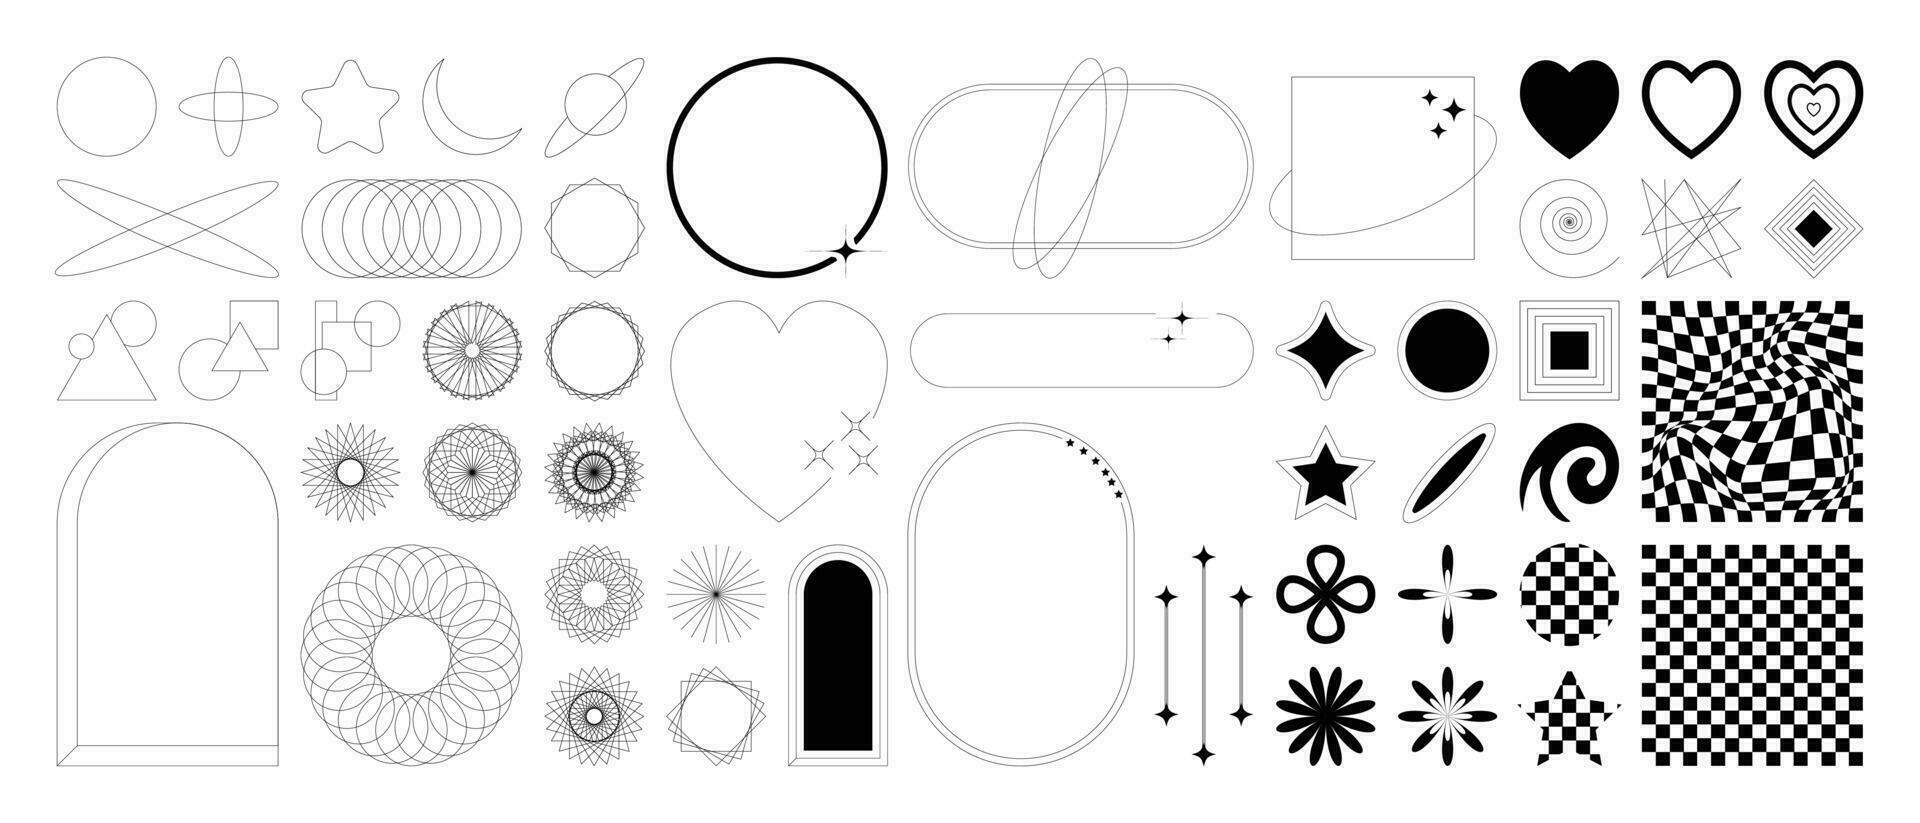 Set of geometric shapes in trendy 90s style. Black trendy design with frame, sparkles, circle, heart, moon, lines. Y2k aesthetic element illustrated for banners, social media, poster design, sticker. vector